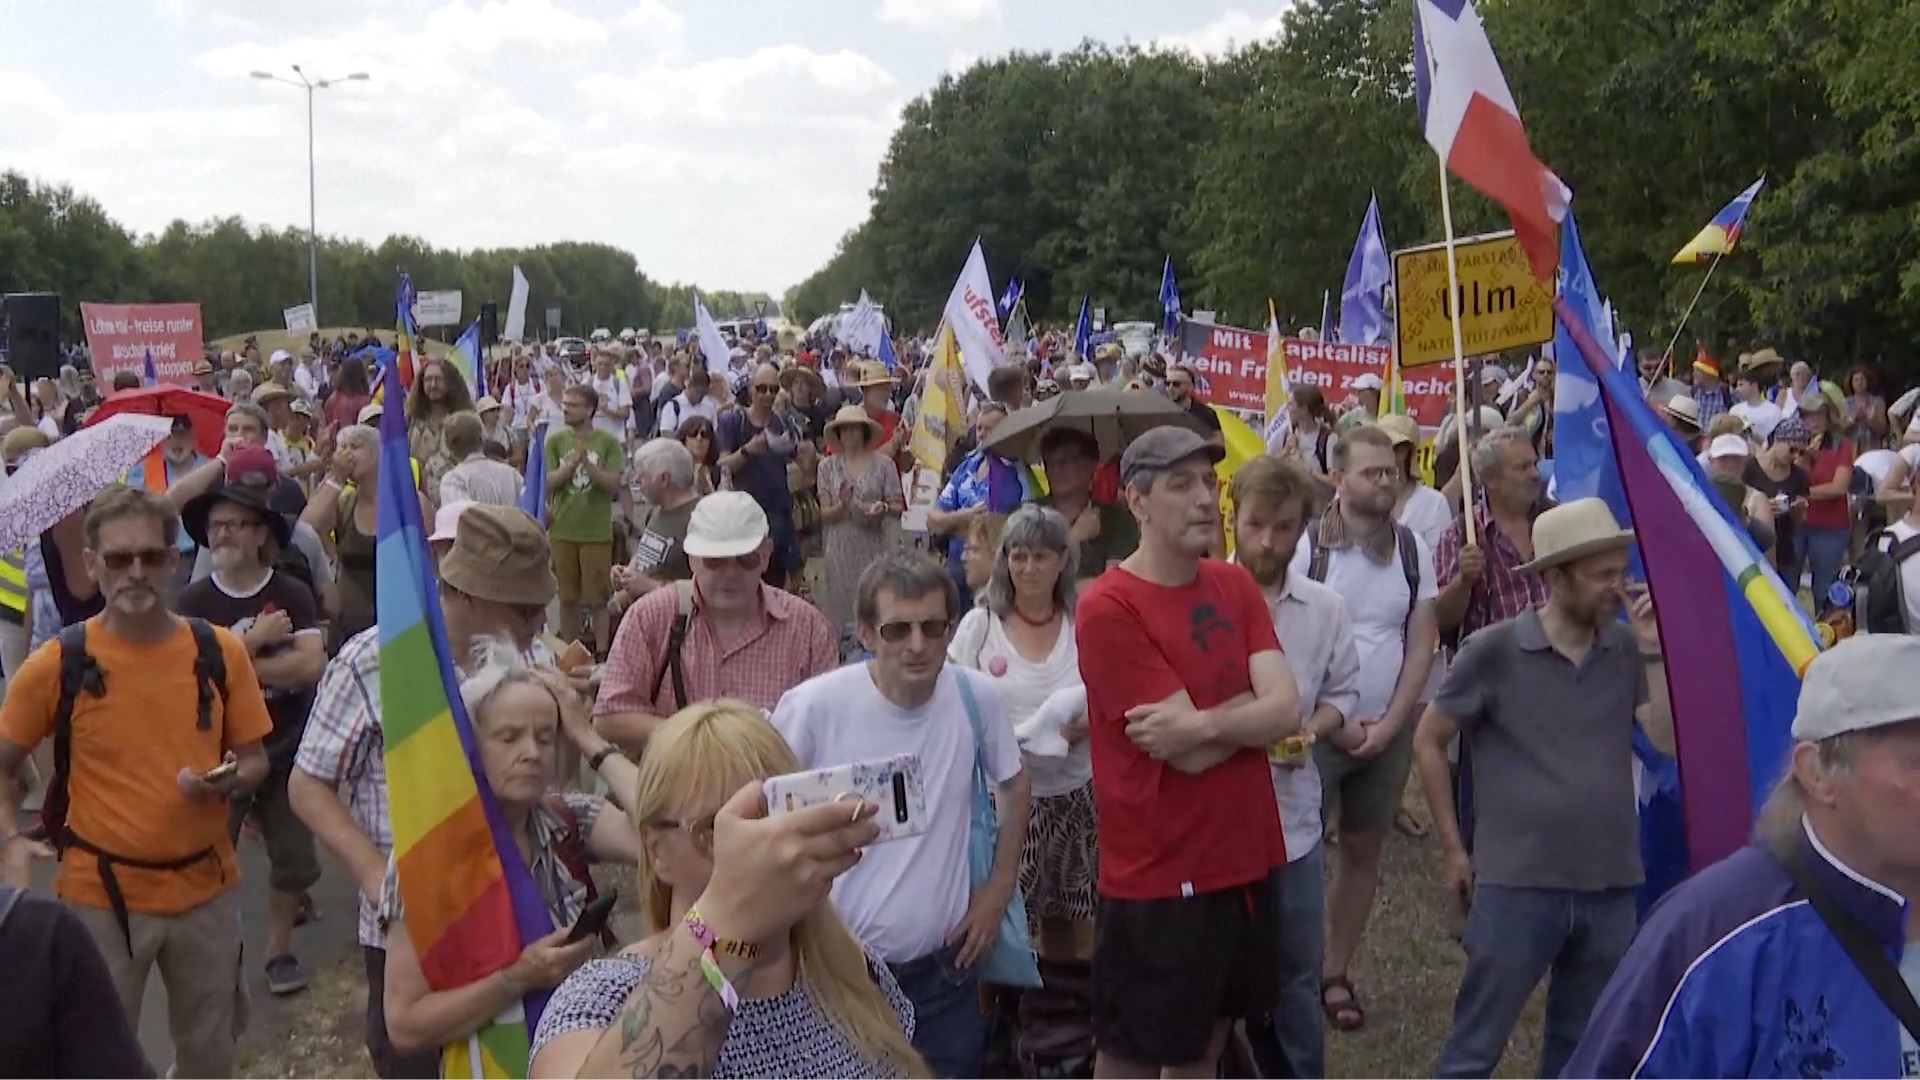 https://video.cgtn.com/news/2023-06-26/Thousands-gather-to-protest-against-NATO-s-Ramstein-Base-in-Germany-1kXeiOrHCs8/video/279480e597eb4e669c4d7b0c66d13bb9/279480e597eb4e669c4d7b0c66d13bb9.jpg